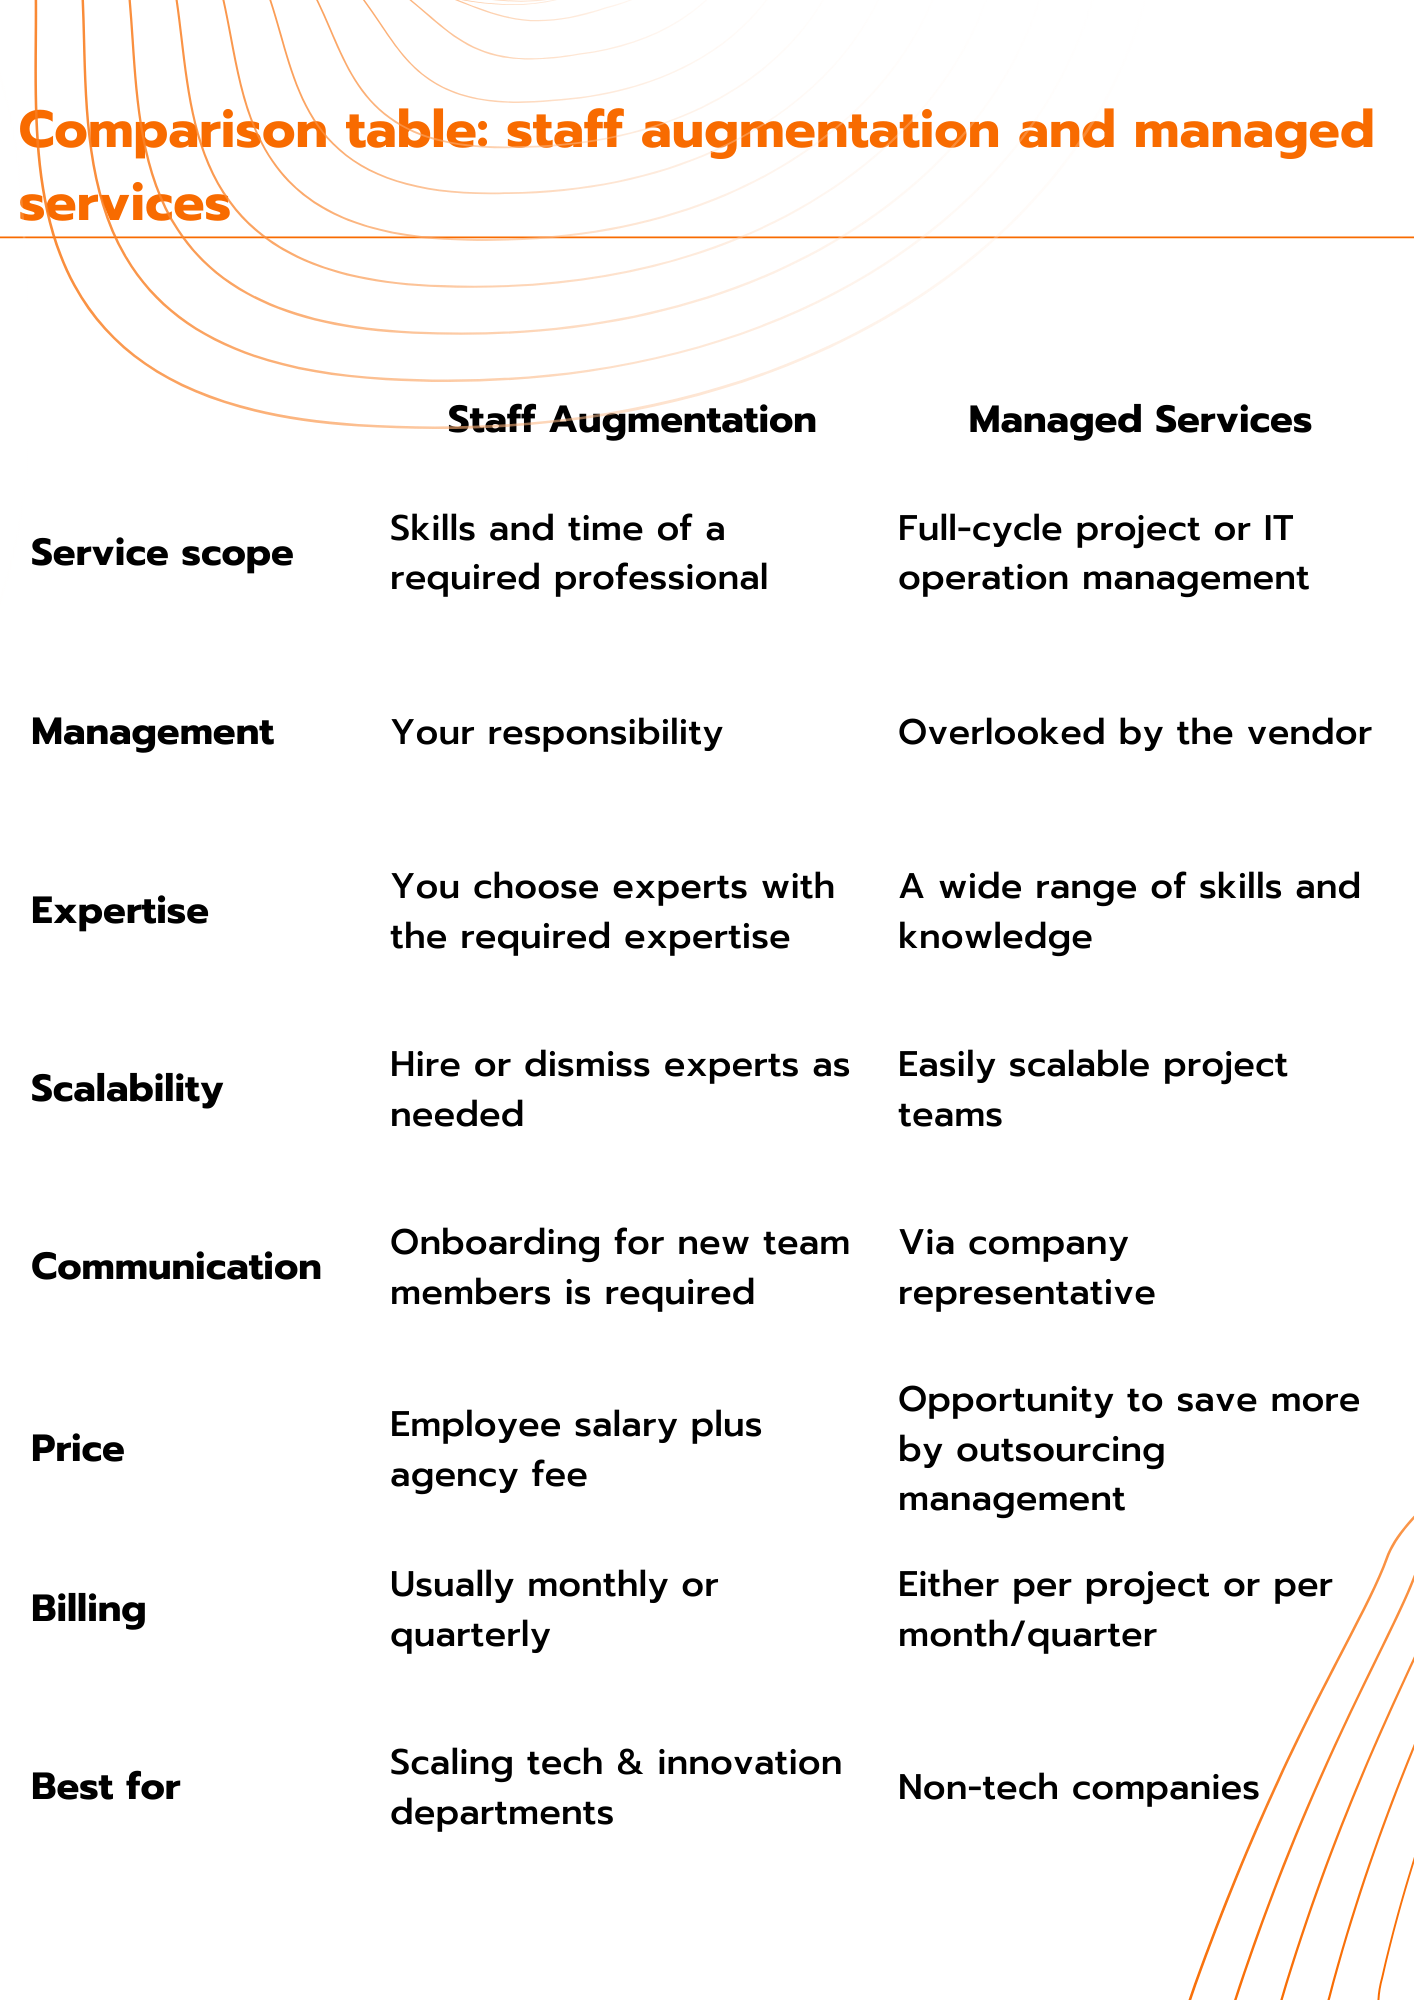 Comparison-table-staff-augmentation-and-managed-services